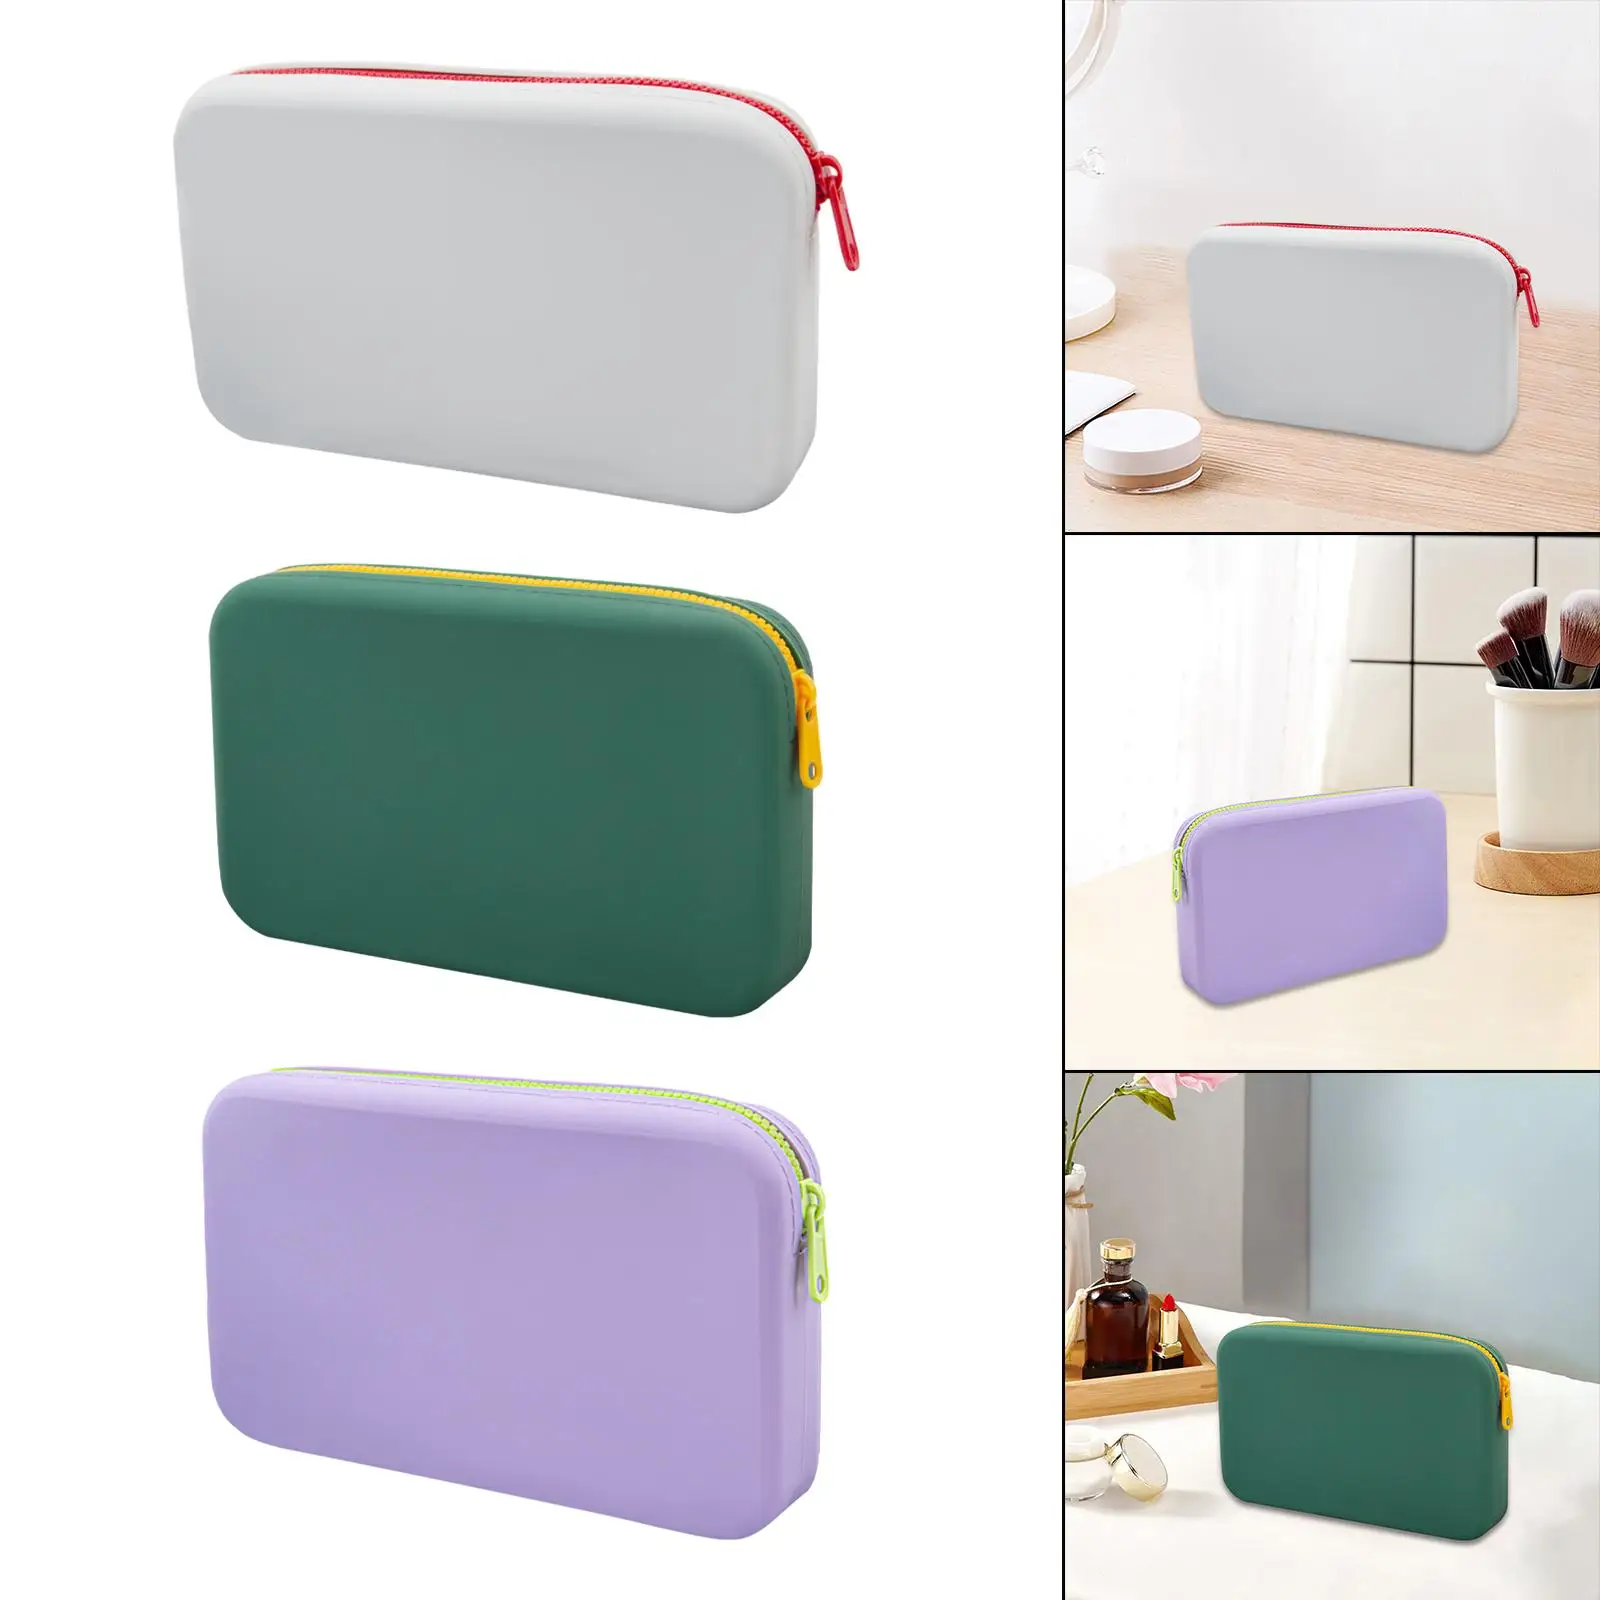 Travel Makeup Bag Large Capacity Stationery Bag Storage Box Cosmetic Organizer for Women Men Beach Traveling Vacation Toiletries